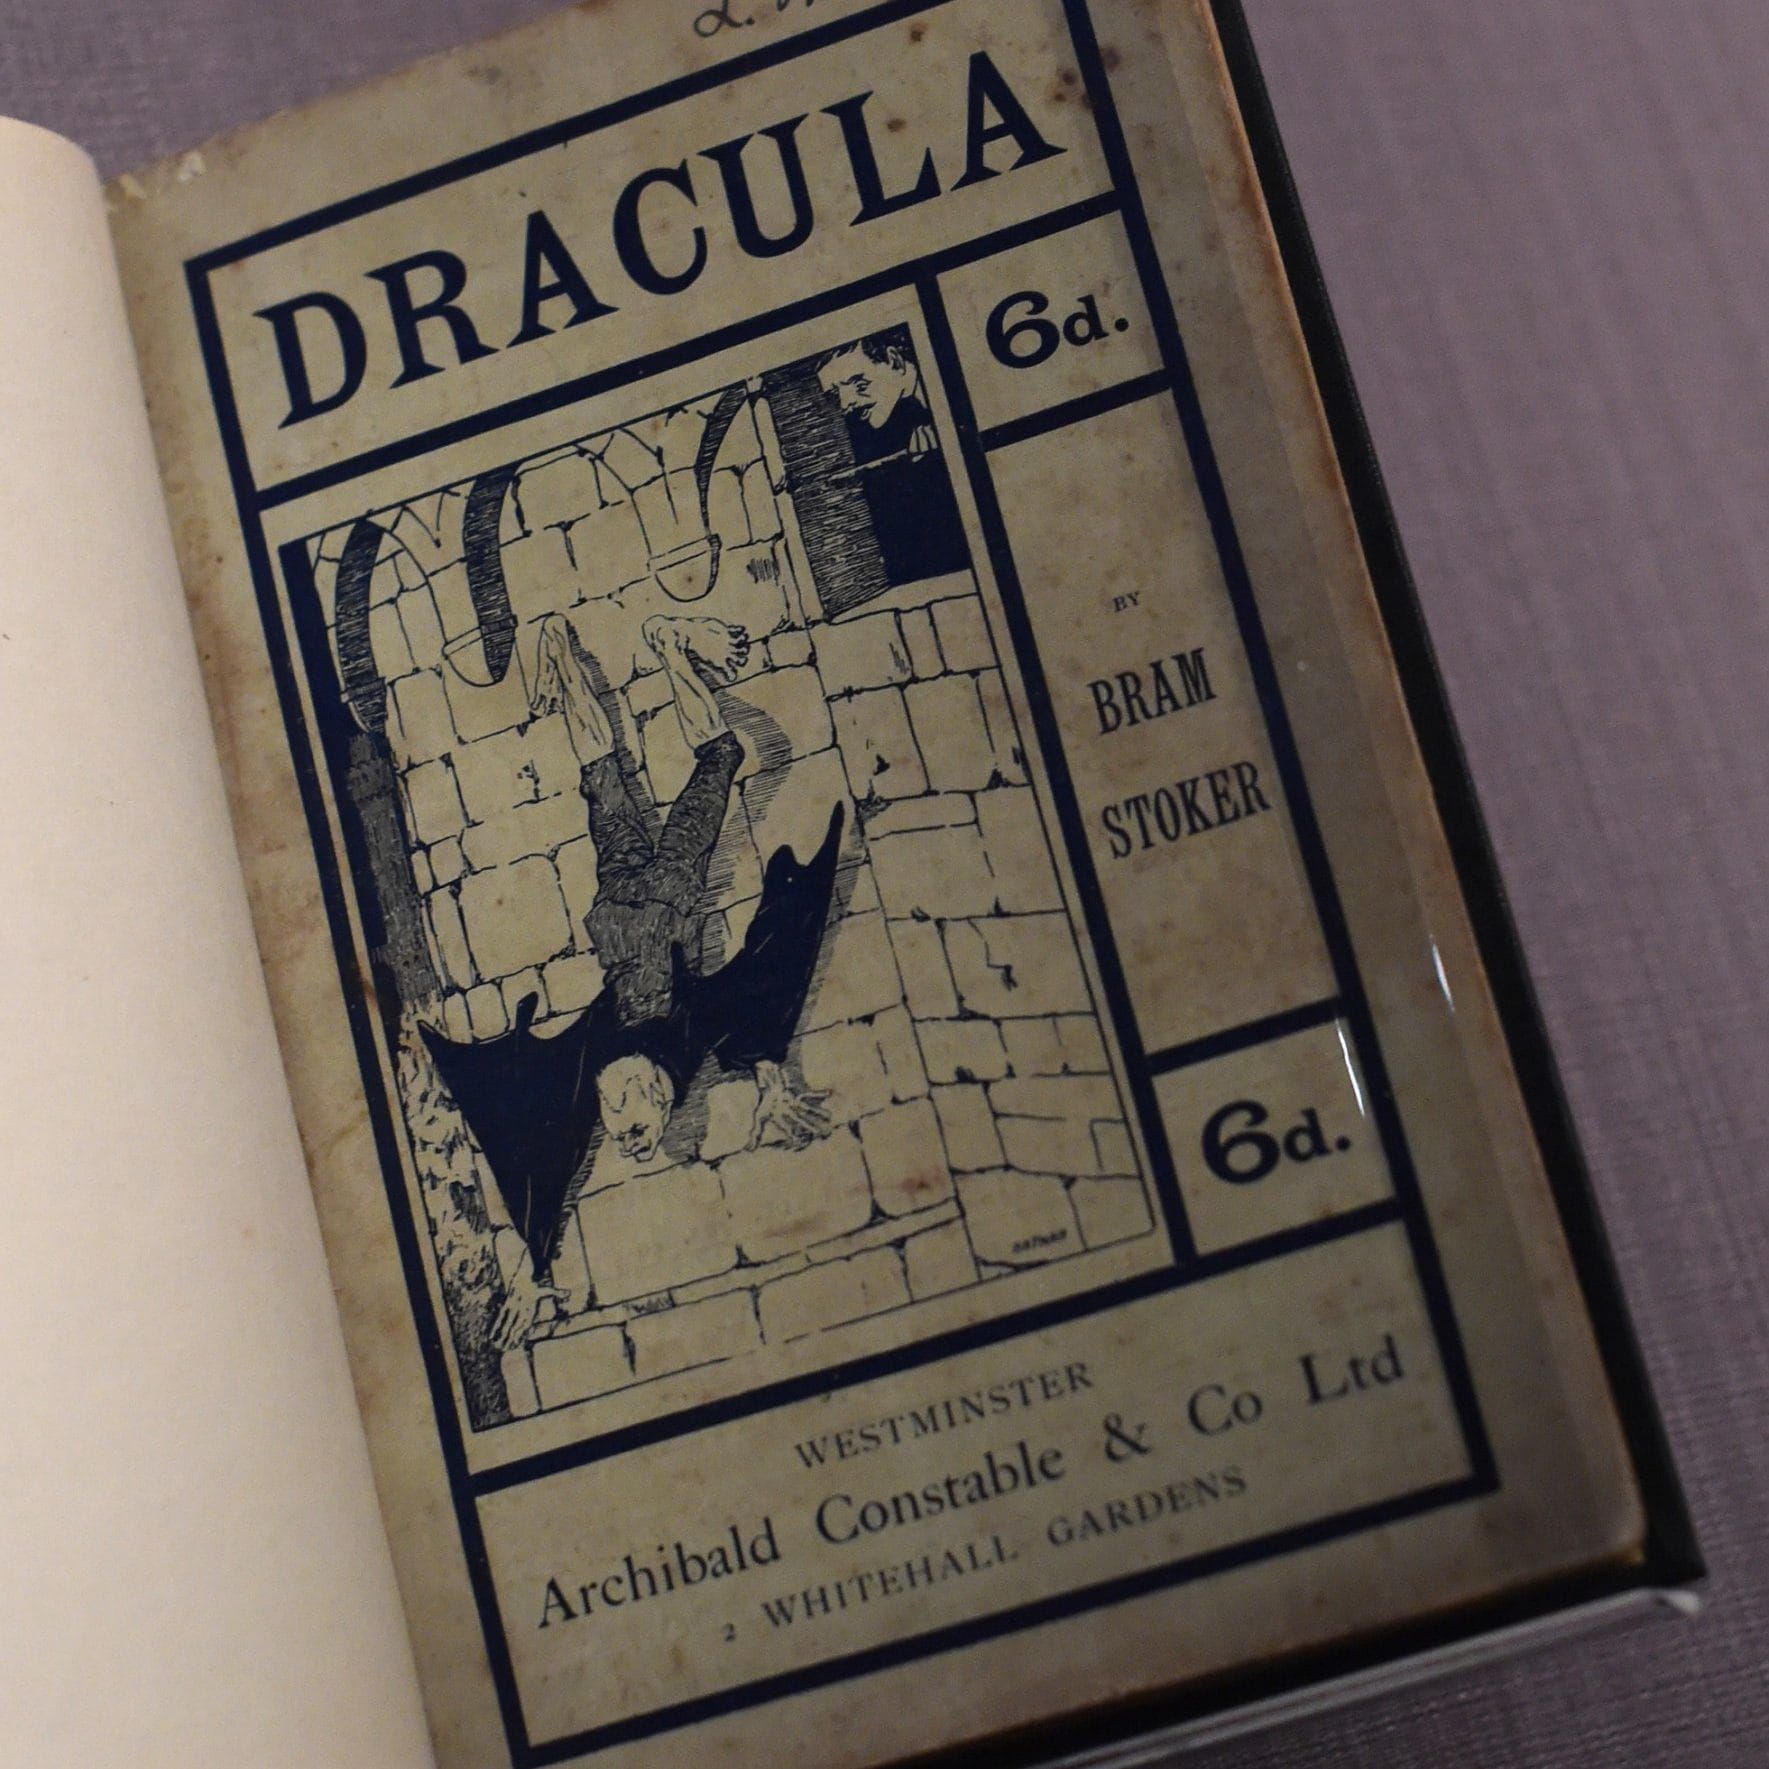 Dracula by Bram Stoker, the first ever published image of the Count Dracula. Image Credit: JULIAN SIMMONDS/THE TELEGRAPH.